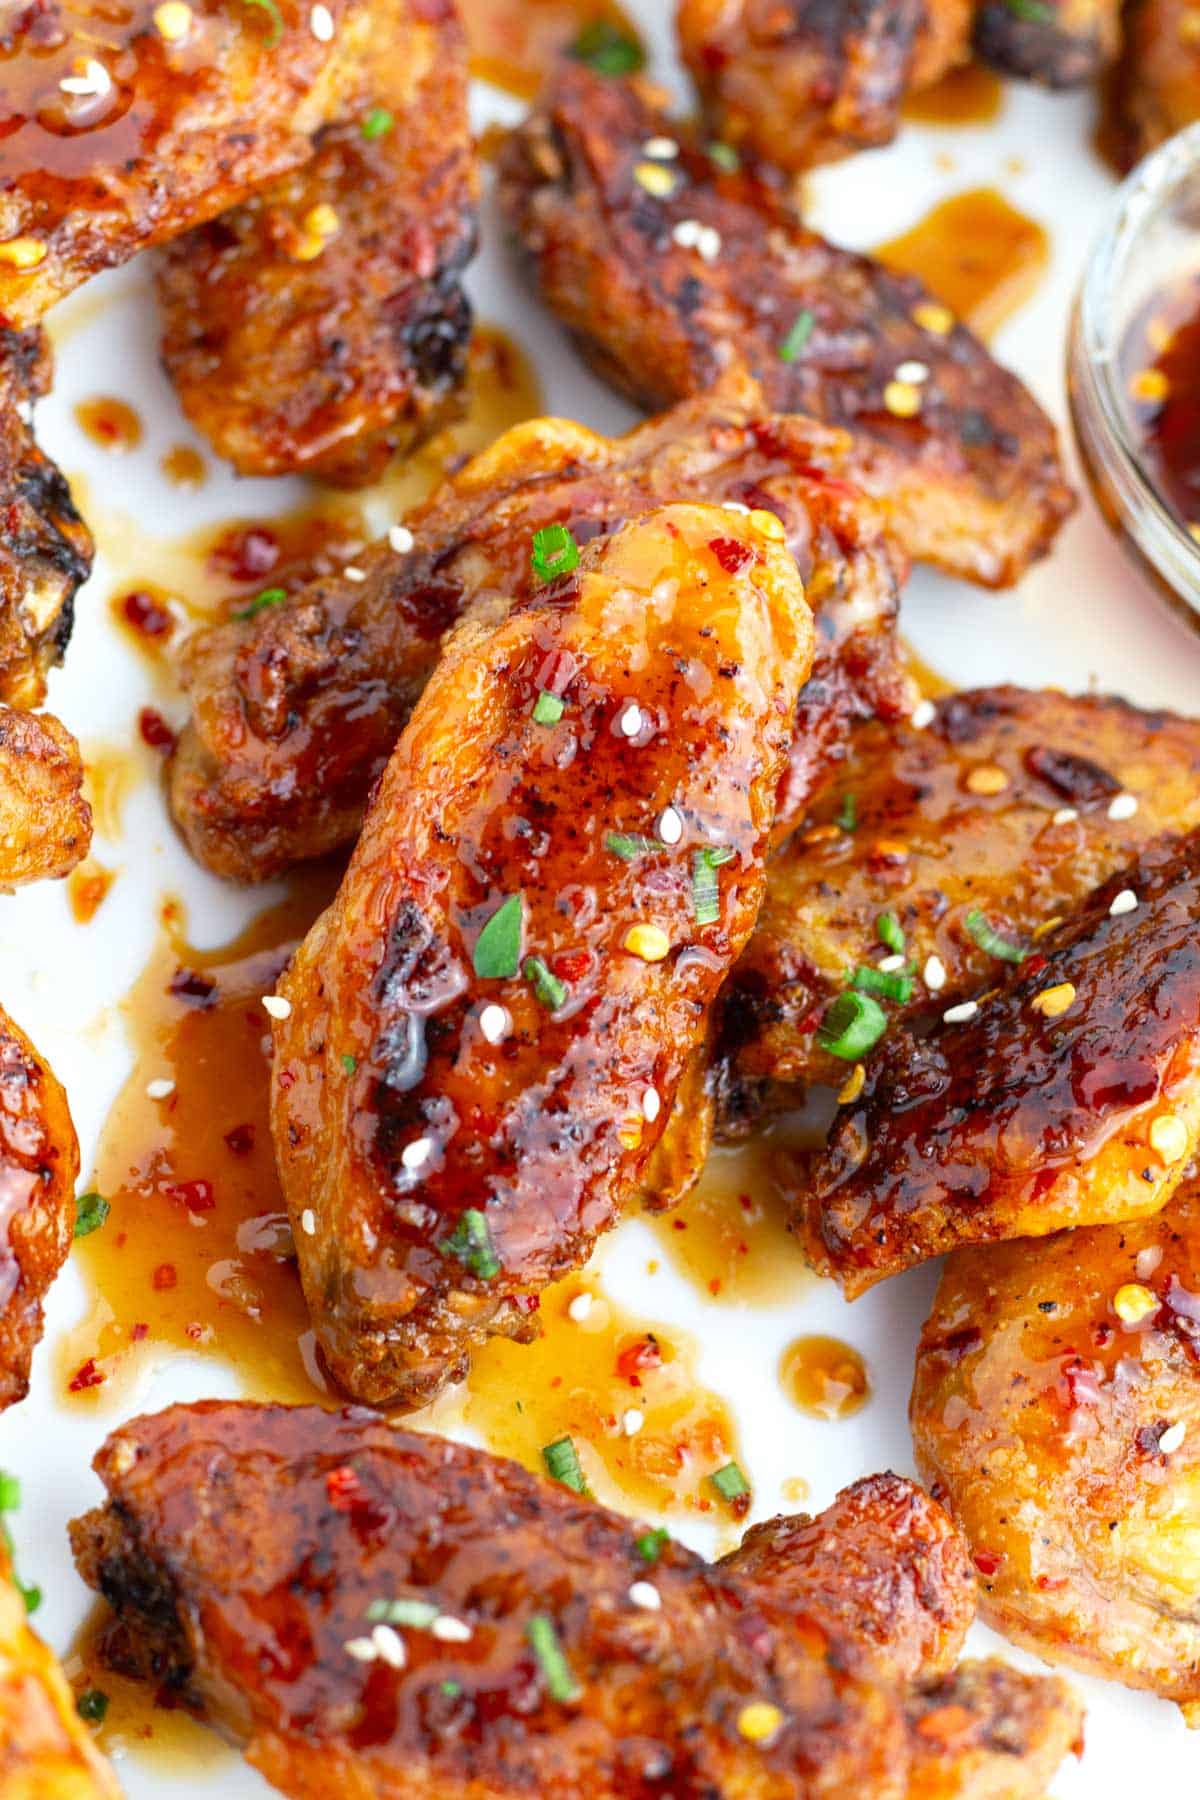 Slightly spicy sweet chili wings sprinkled with sesame seeds.